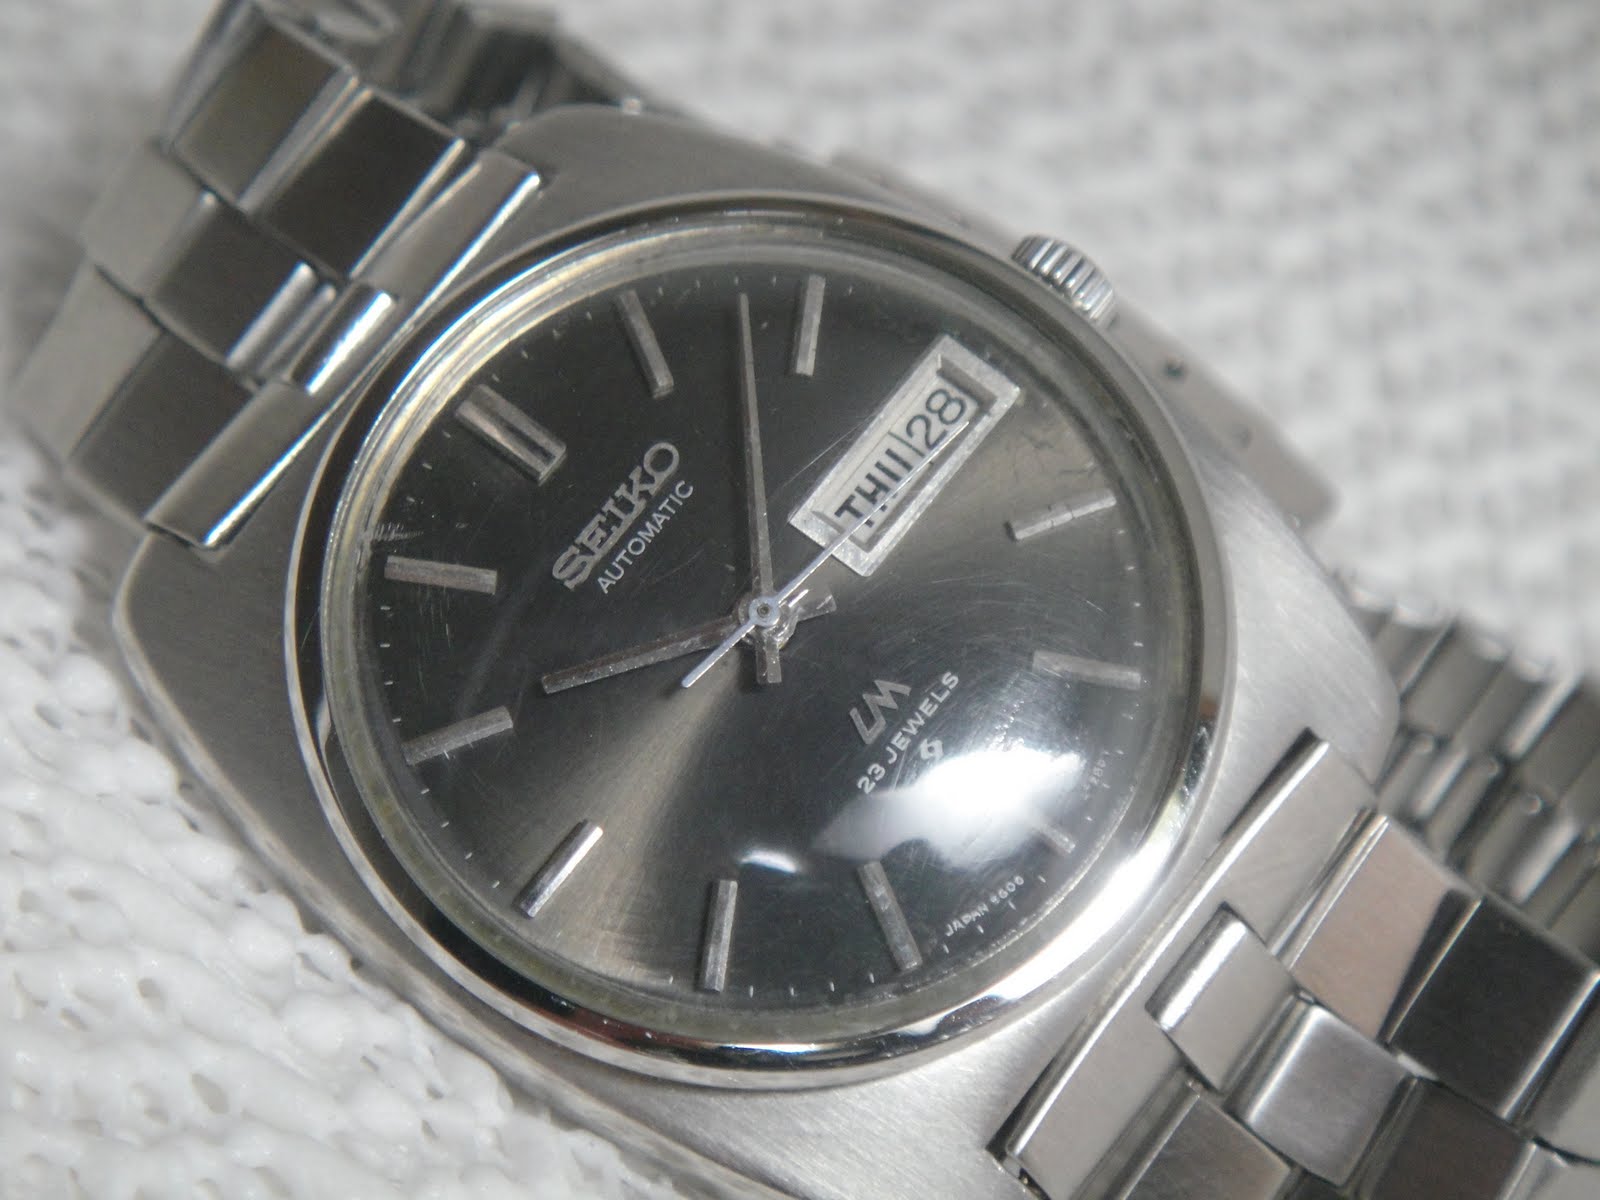 Antique Watch Bar: SEIKO LORD MATIC 5606-7130 SL02 (SOLD)